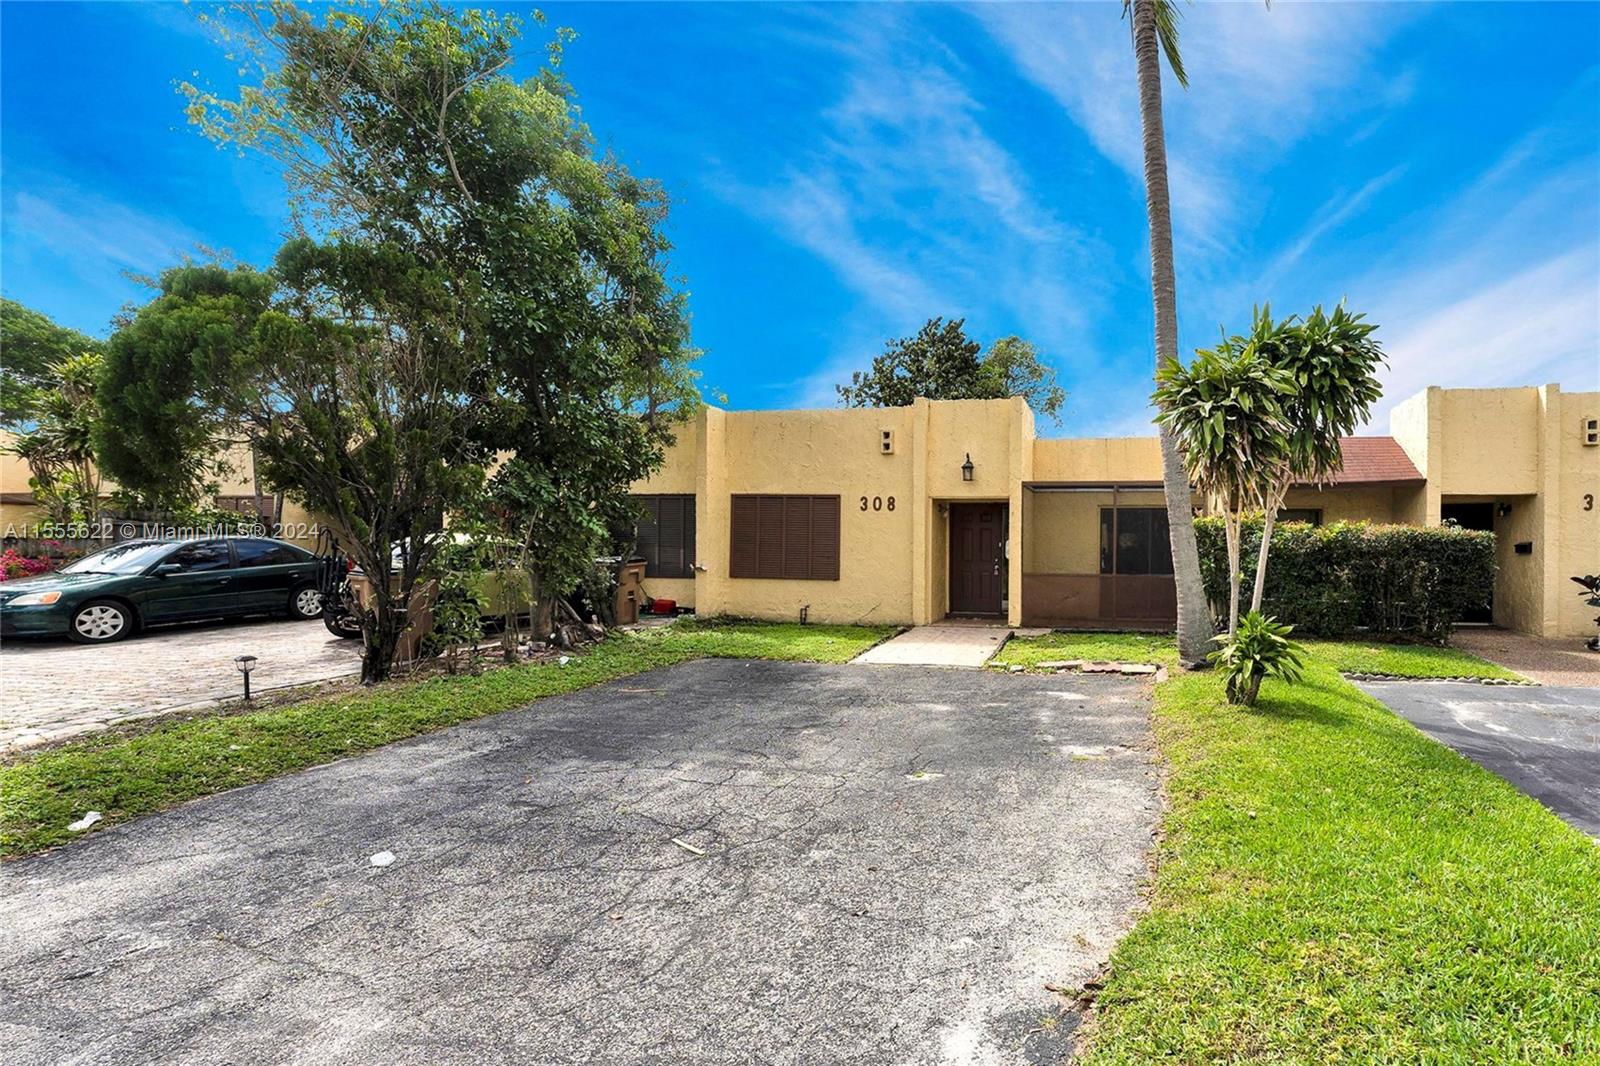 Property for Sale at 308 Nw 43rd Pl Pl, Deerfield Beach, Broward County, Florida - Bedrooms: 3 
Bathrooms: 2  - $329,000